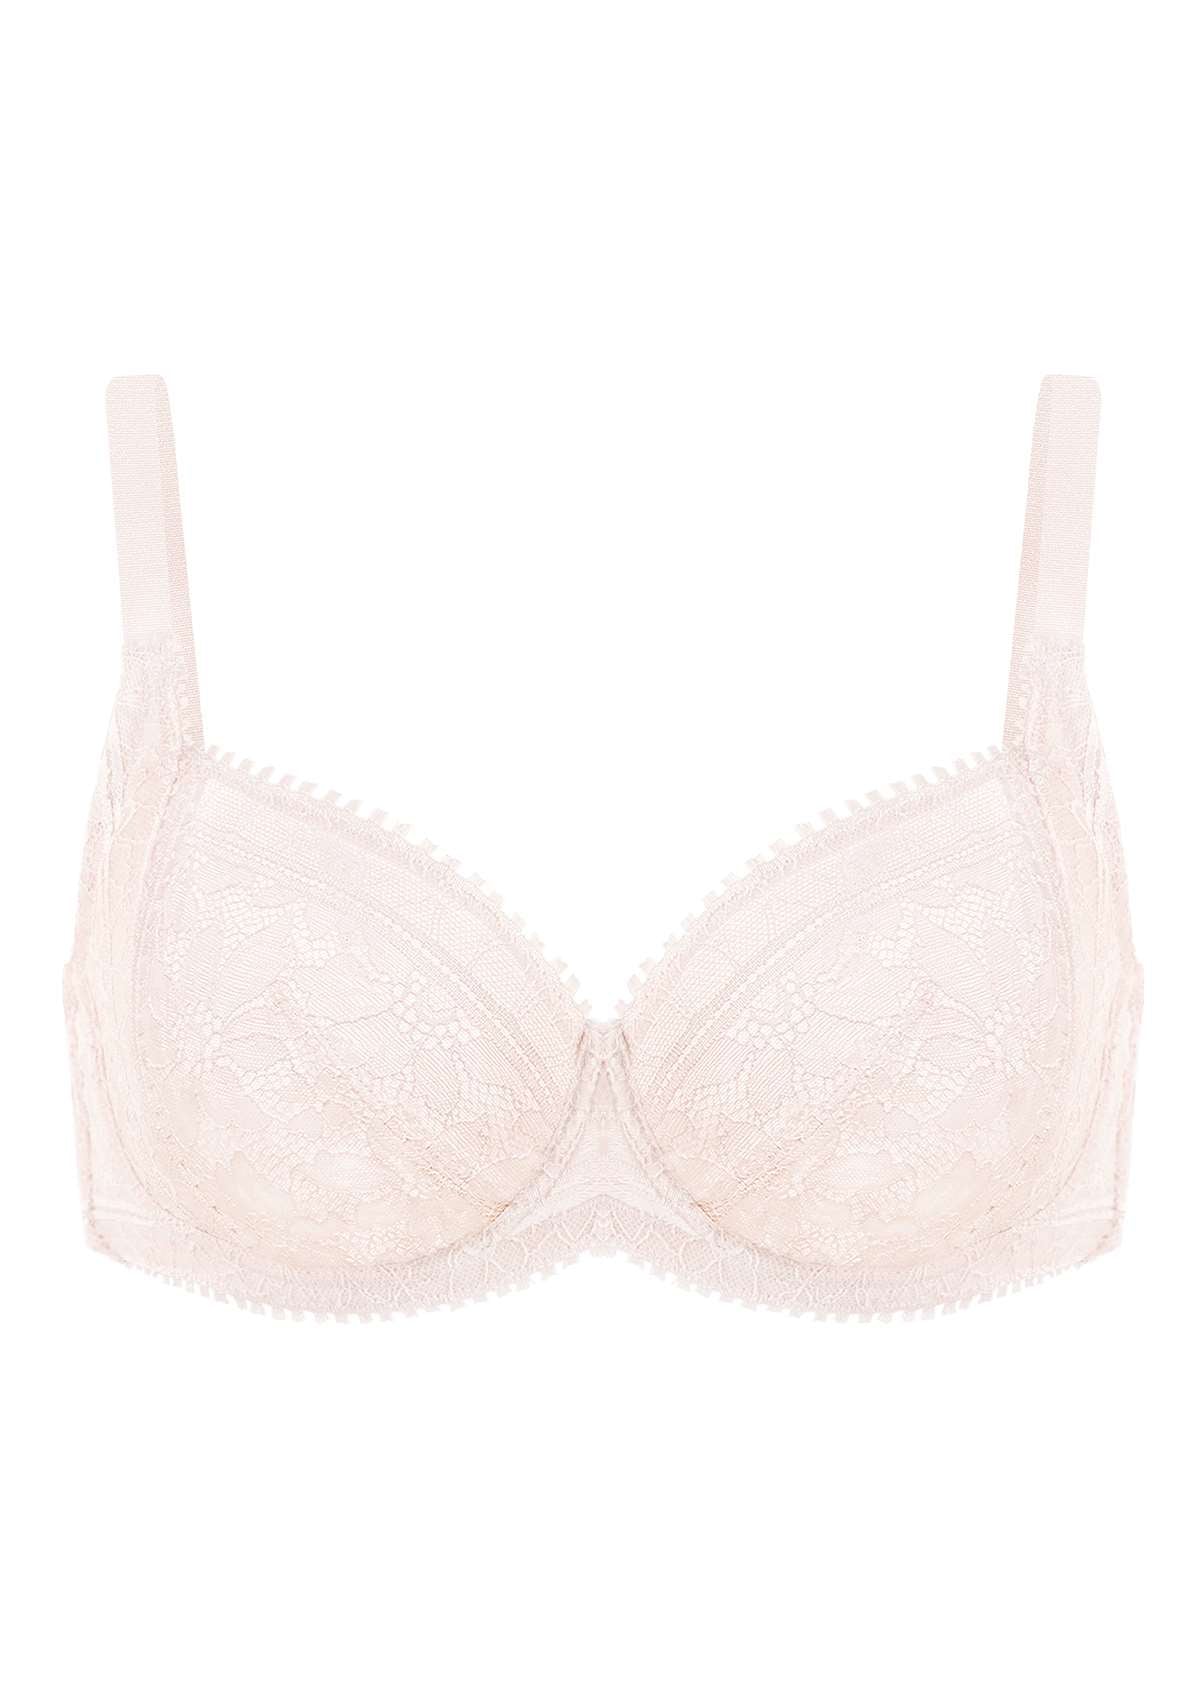 HSIA Silene Floral Delicate Unlined Lace Soft Cup Uplift Bra - Champagne / 36 / DD/E